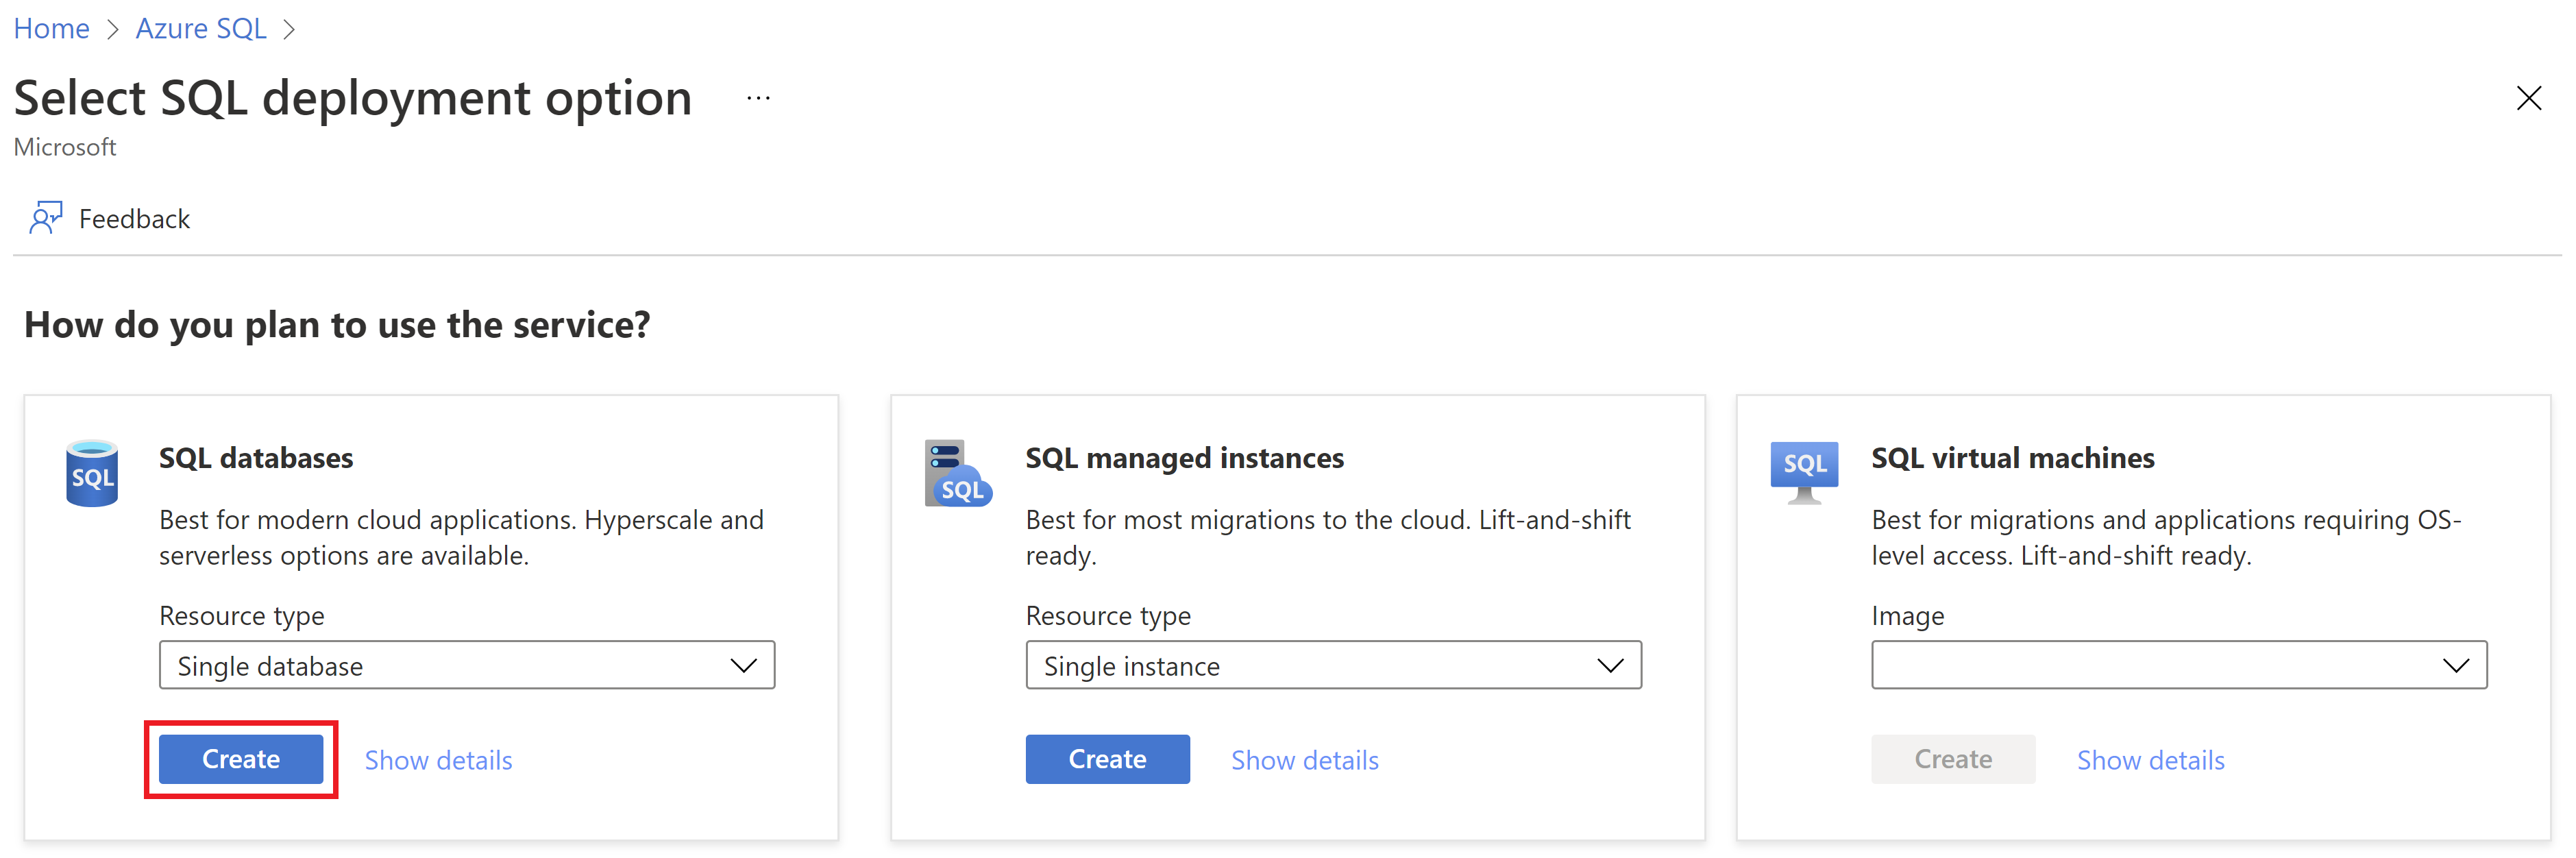 A screenshot of the Select SQL Deployment option page in the Azure portal.